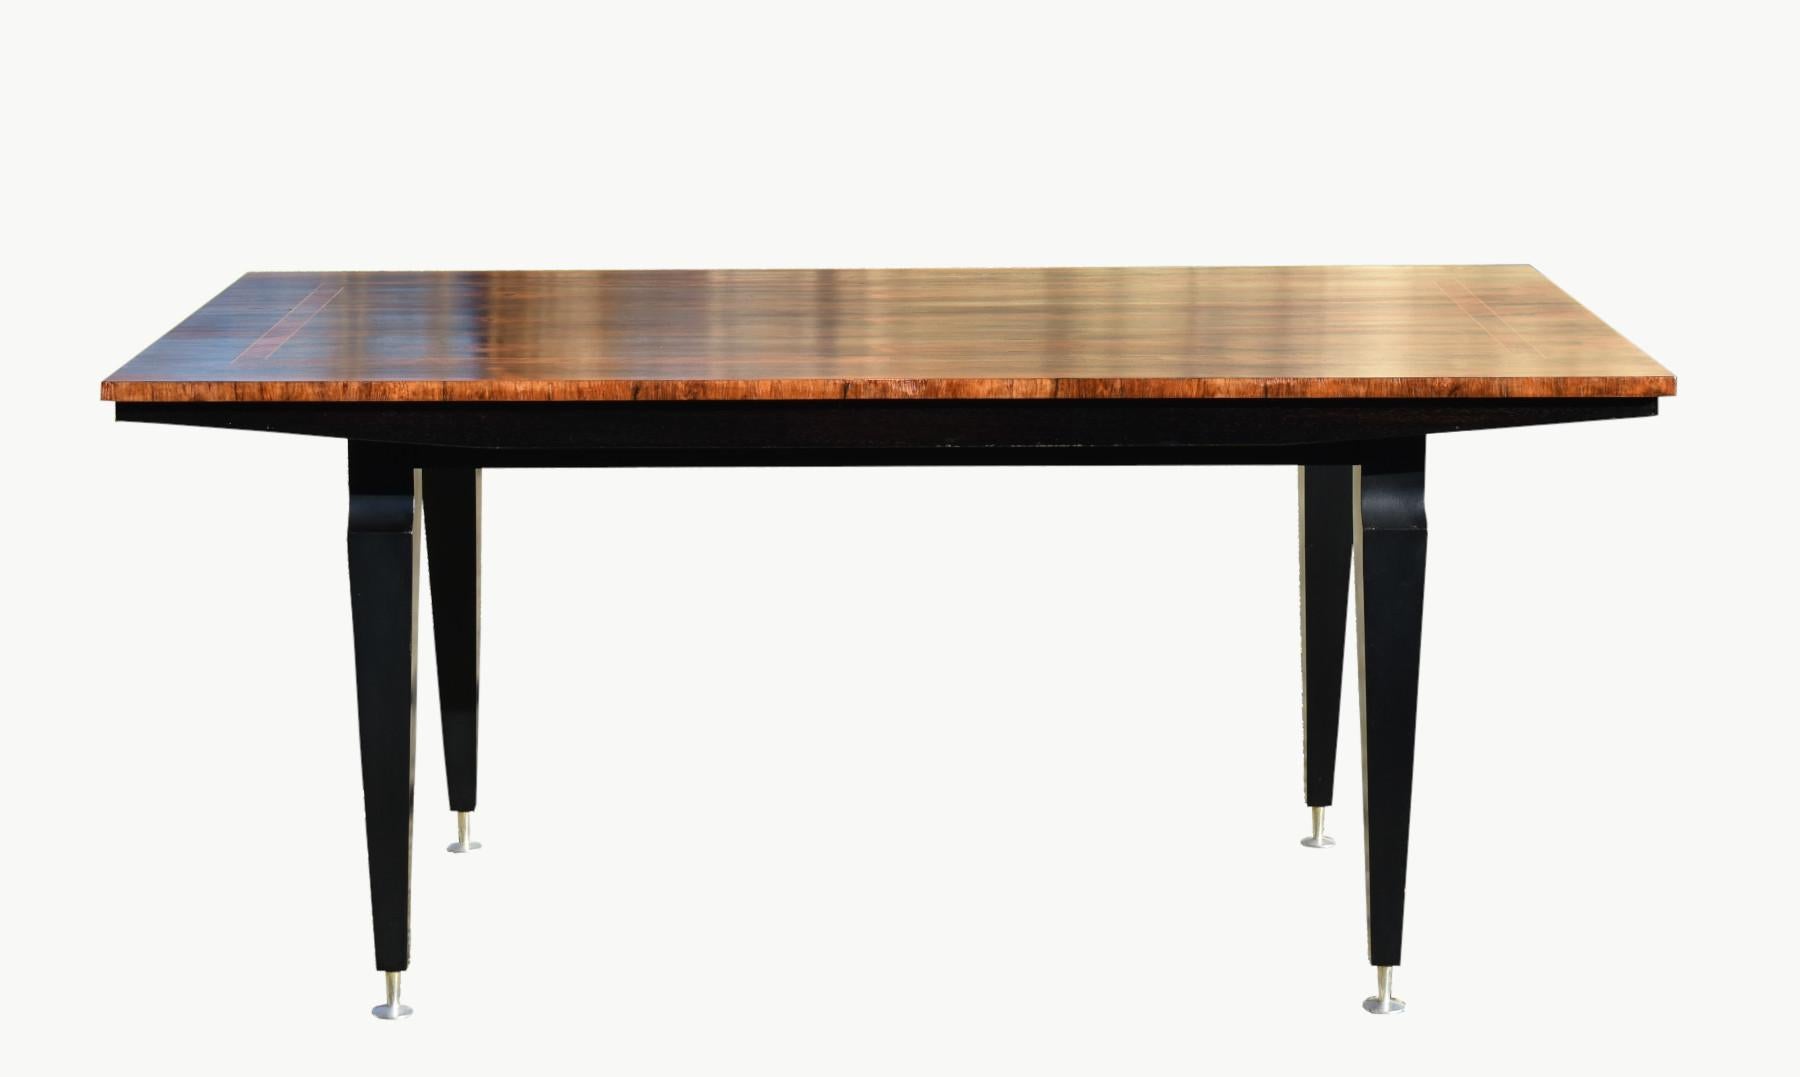 Mid-Century French Rosewood Dining Table

A stylised inlaid Rosewood Dining Table with a well-figured book-matched top in rosewood.

The frieze below is ebonised with a piano glass finish.

The table features tapered legs leading down to fine